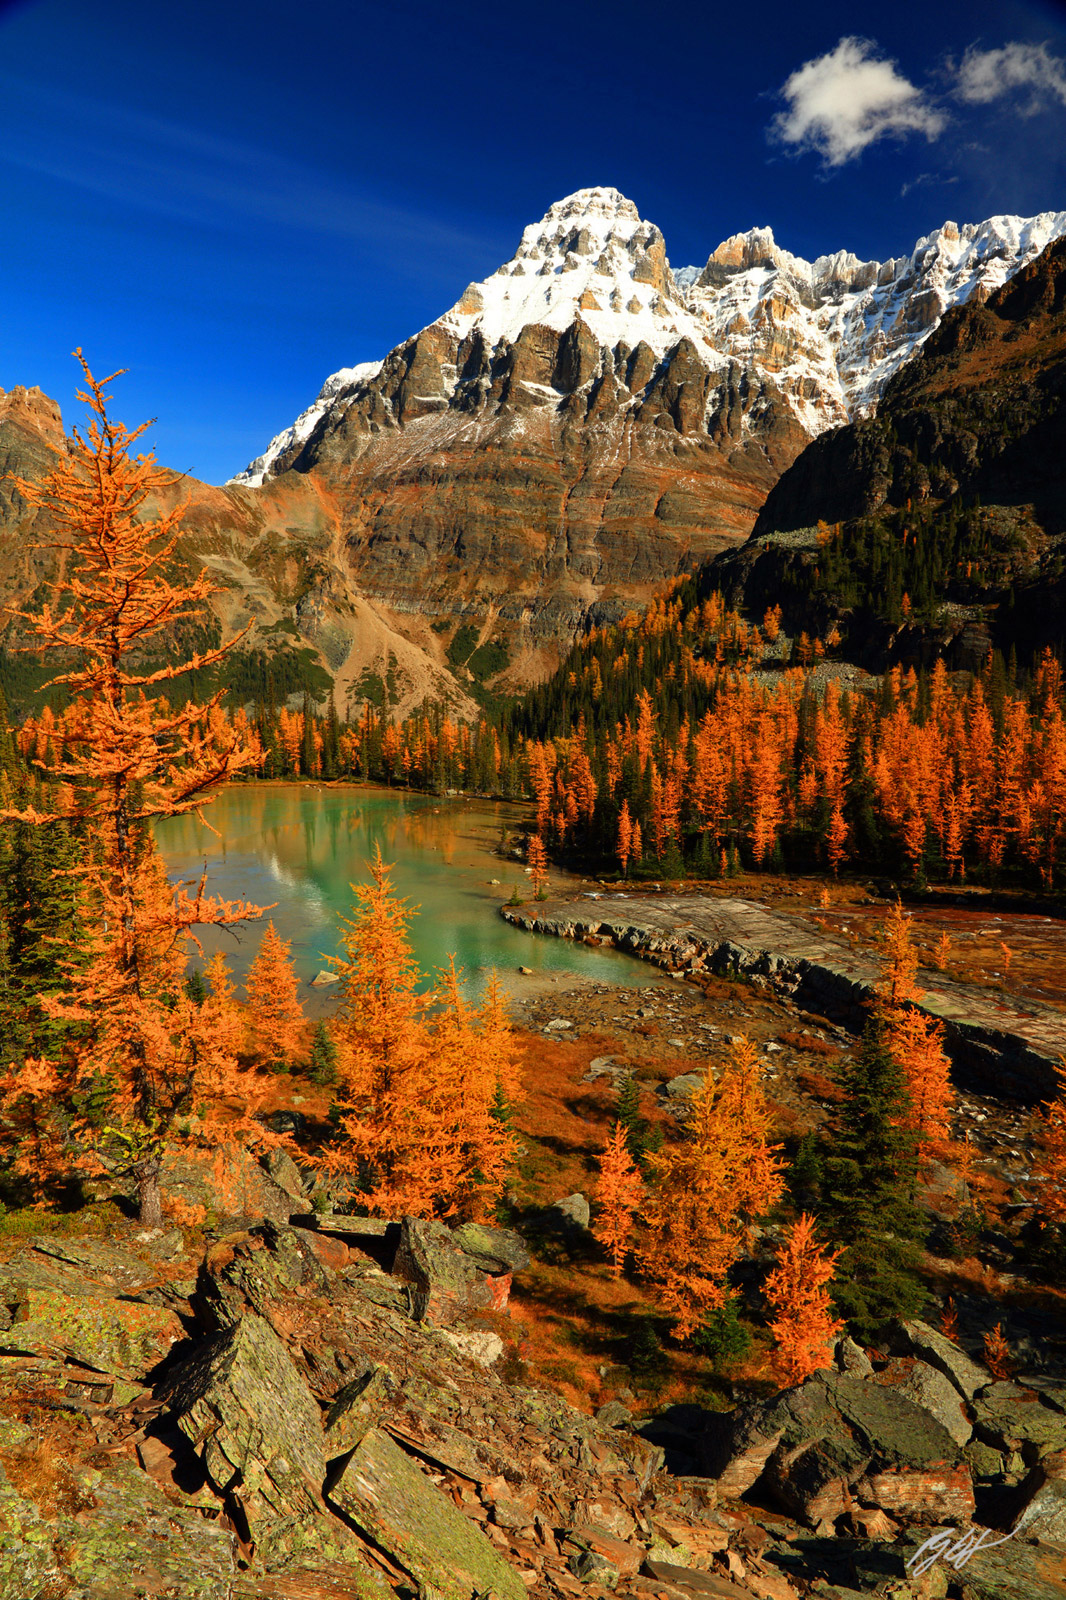 Golden Larch and Mt Huber from Opabin Plateau, in the Lake O'Hara Region of Yoho National Park in Canada